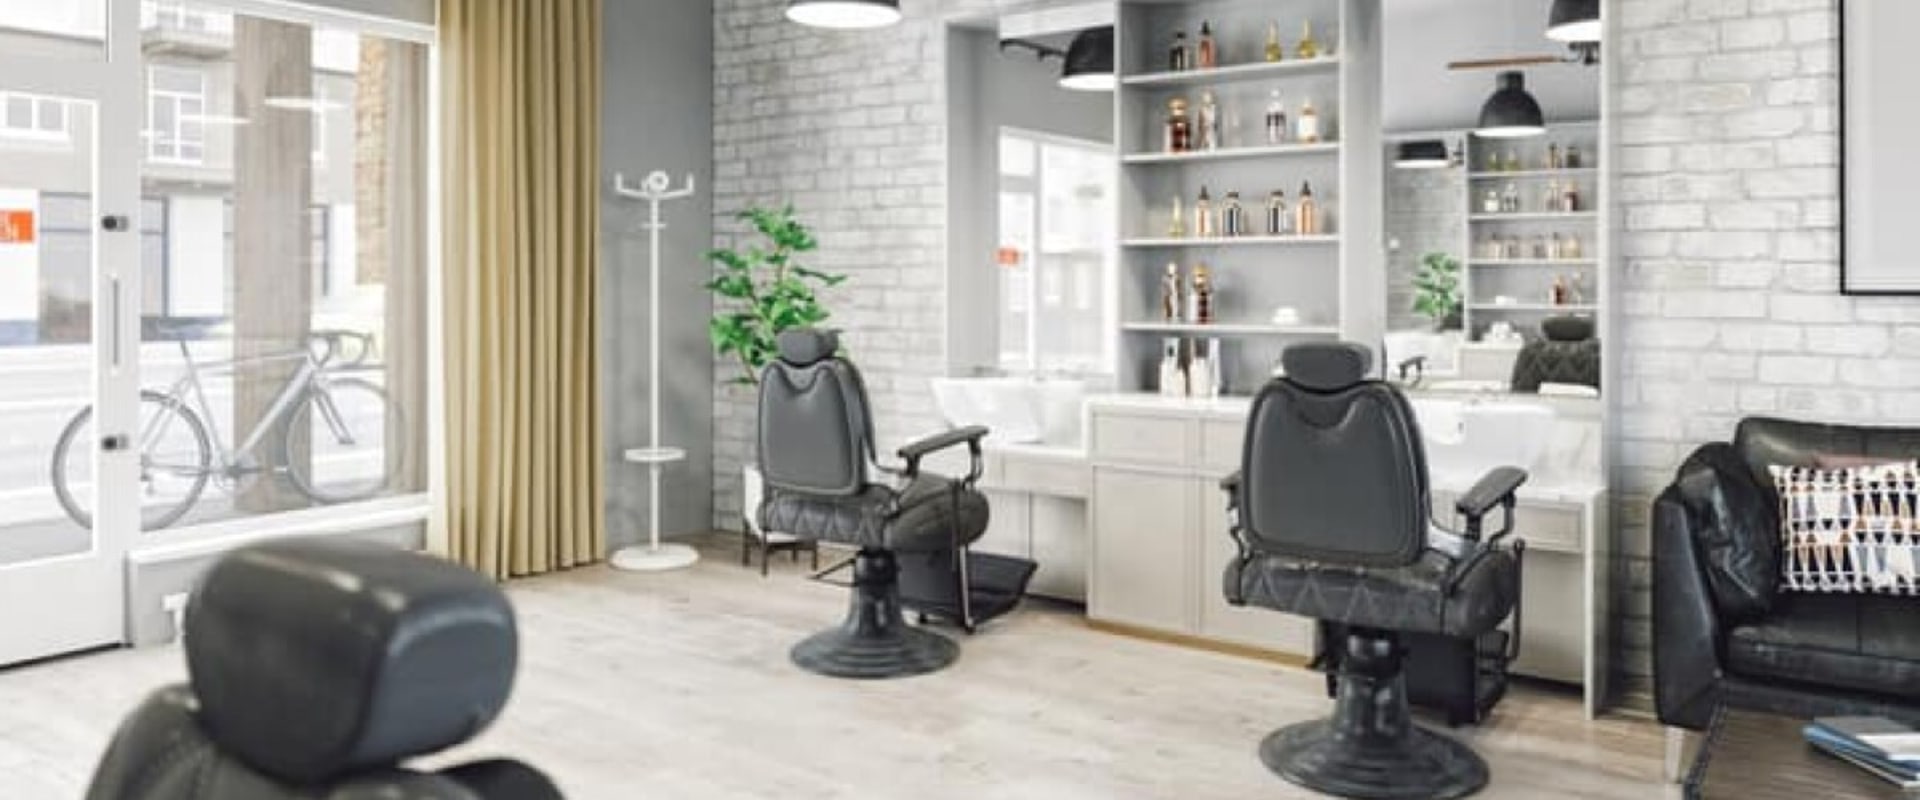 How do i find the best beauty salon?